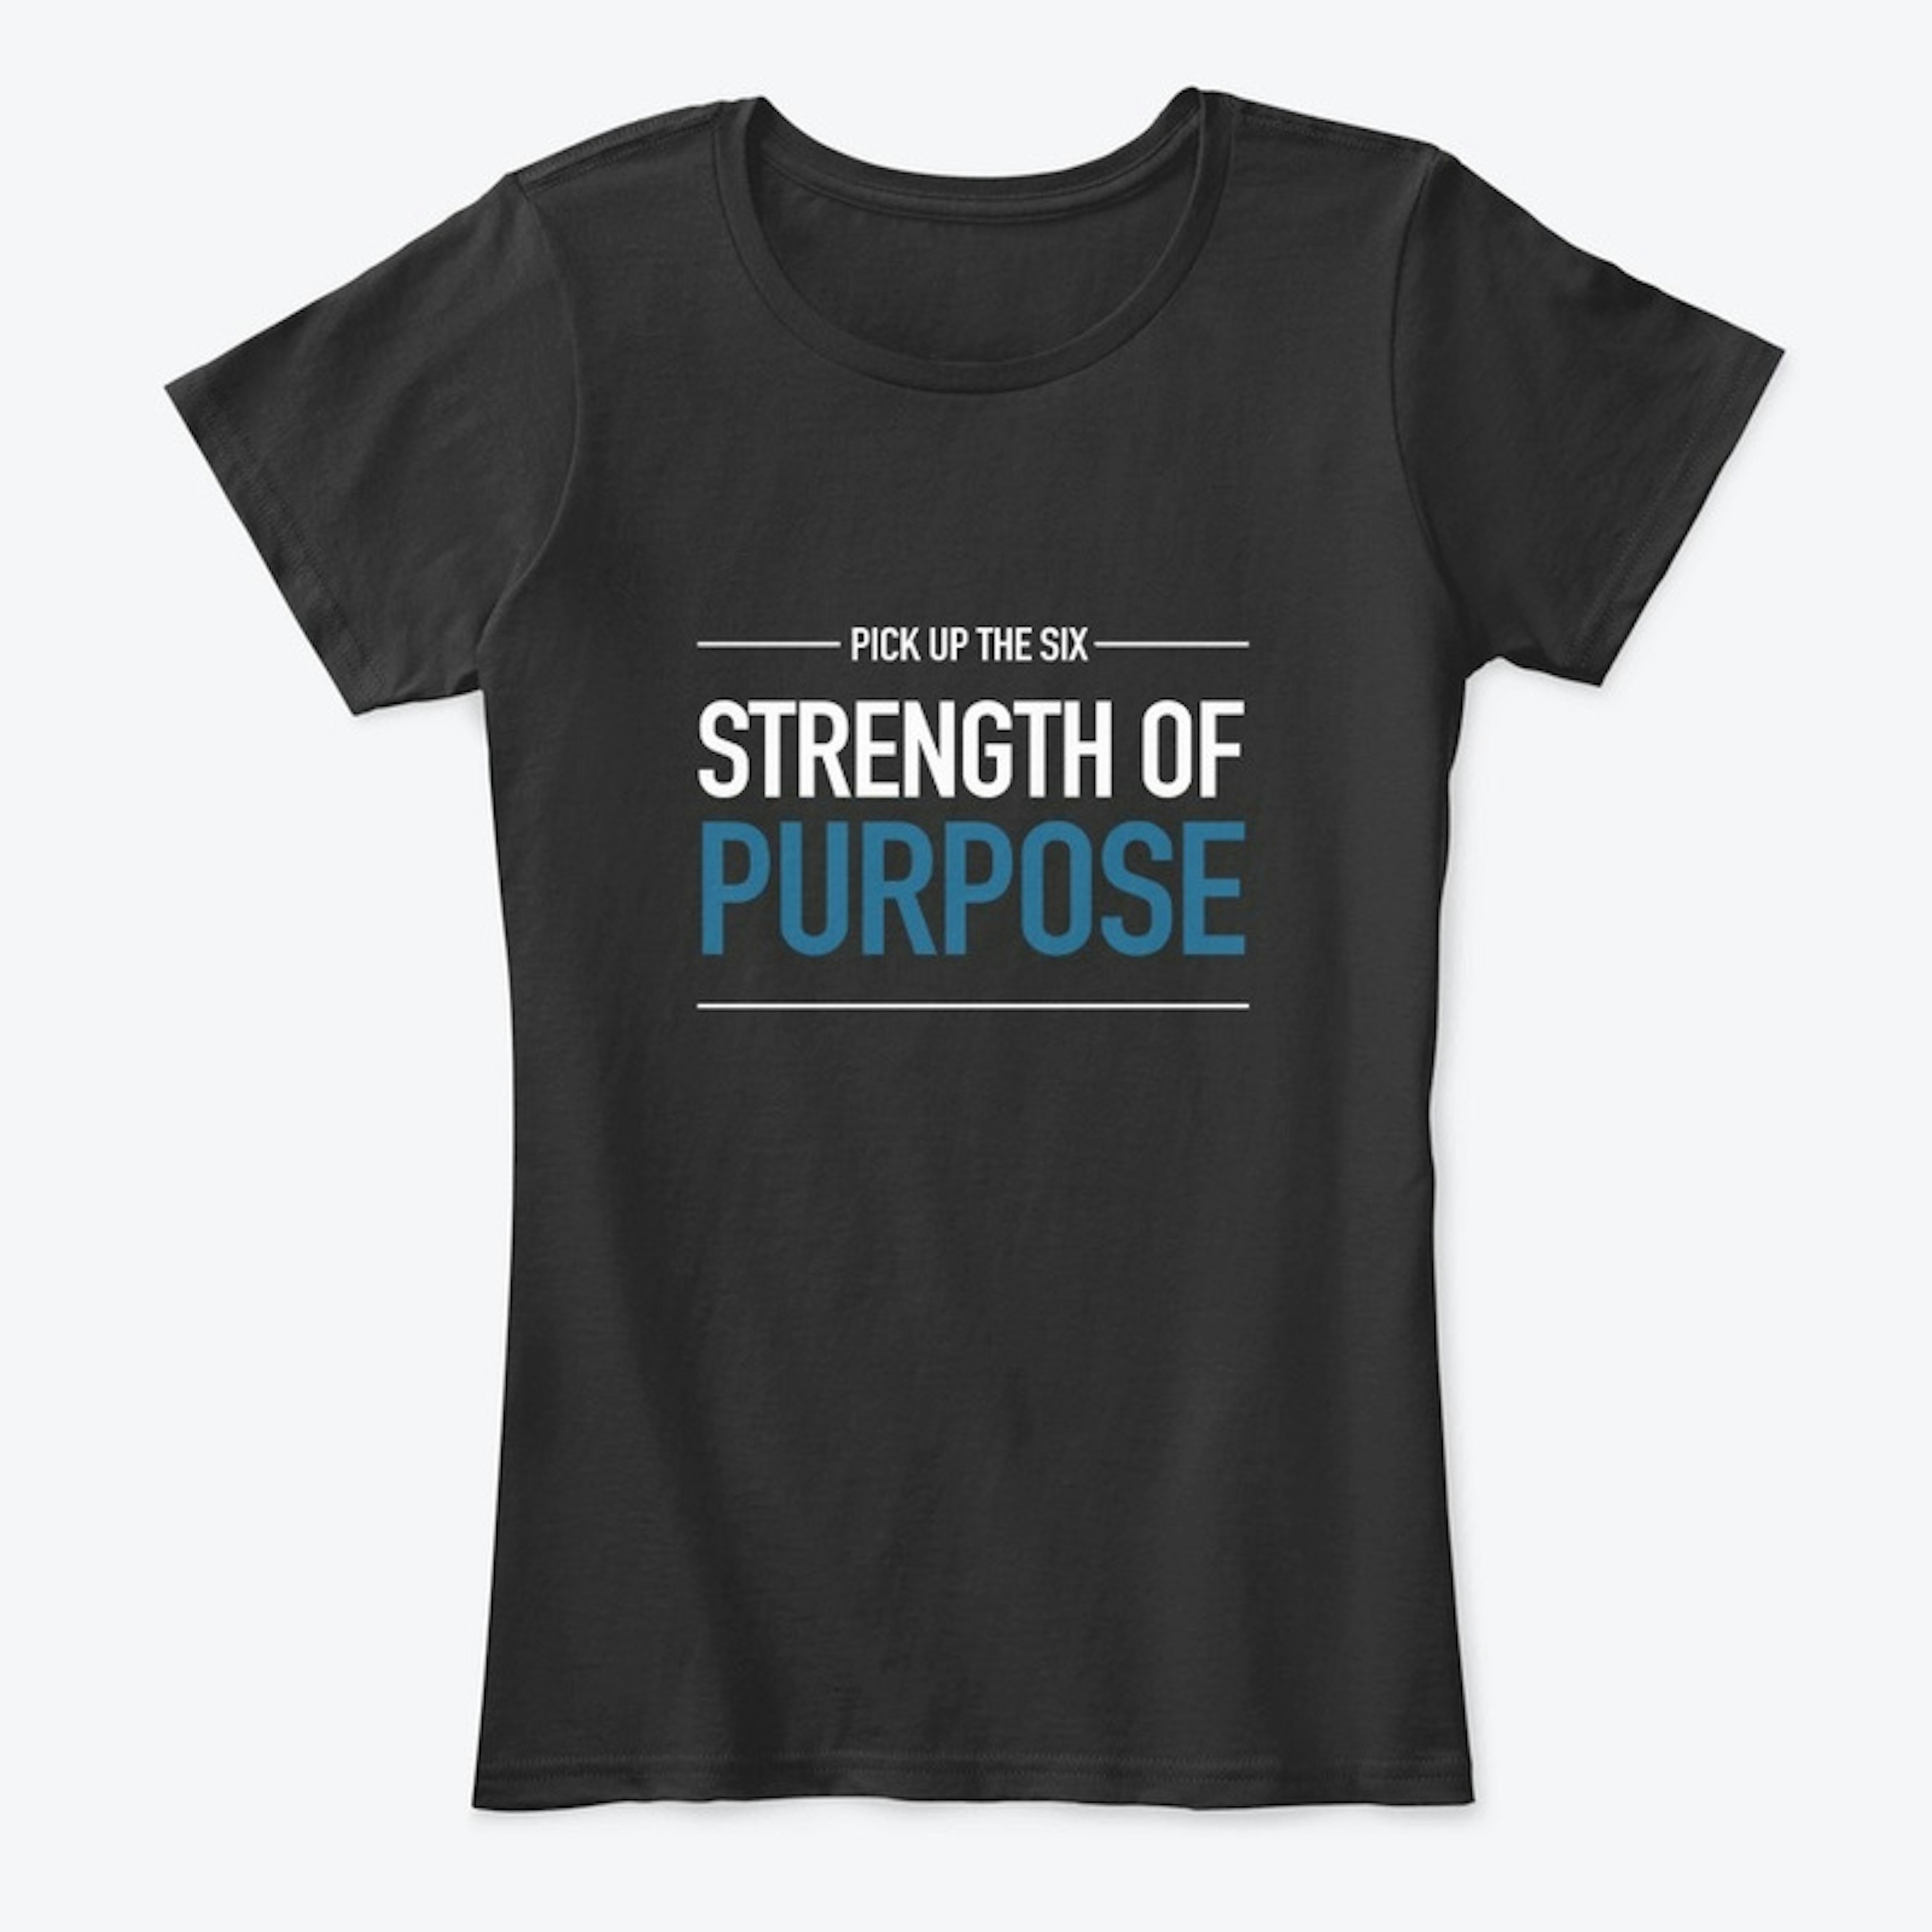 PICK UP THE SIX® | STRENGTH OF PURPOSE